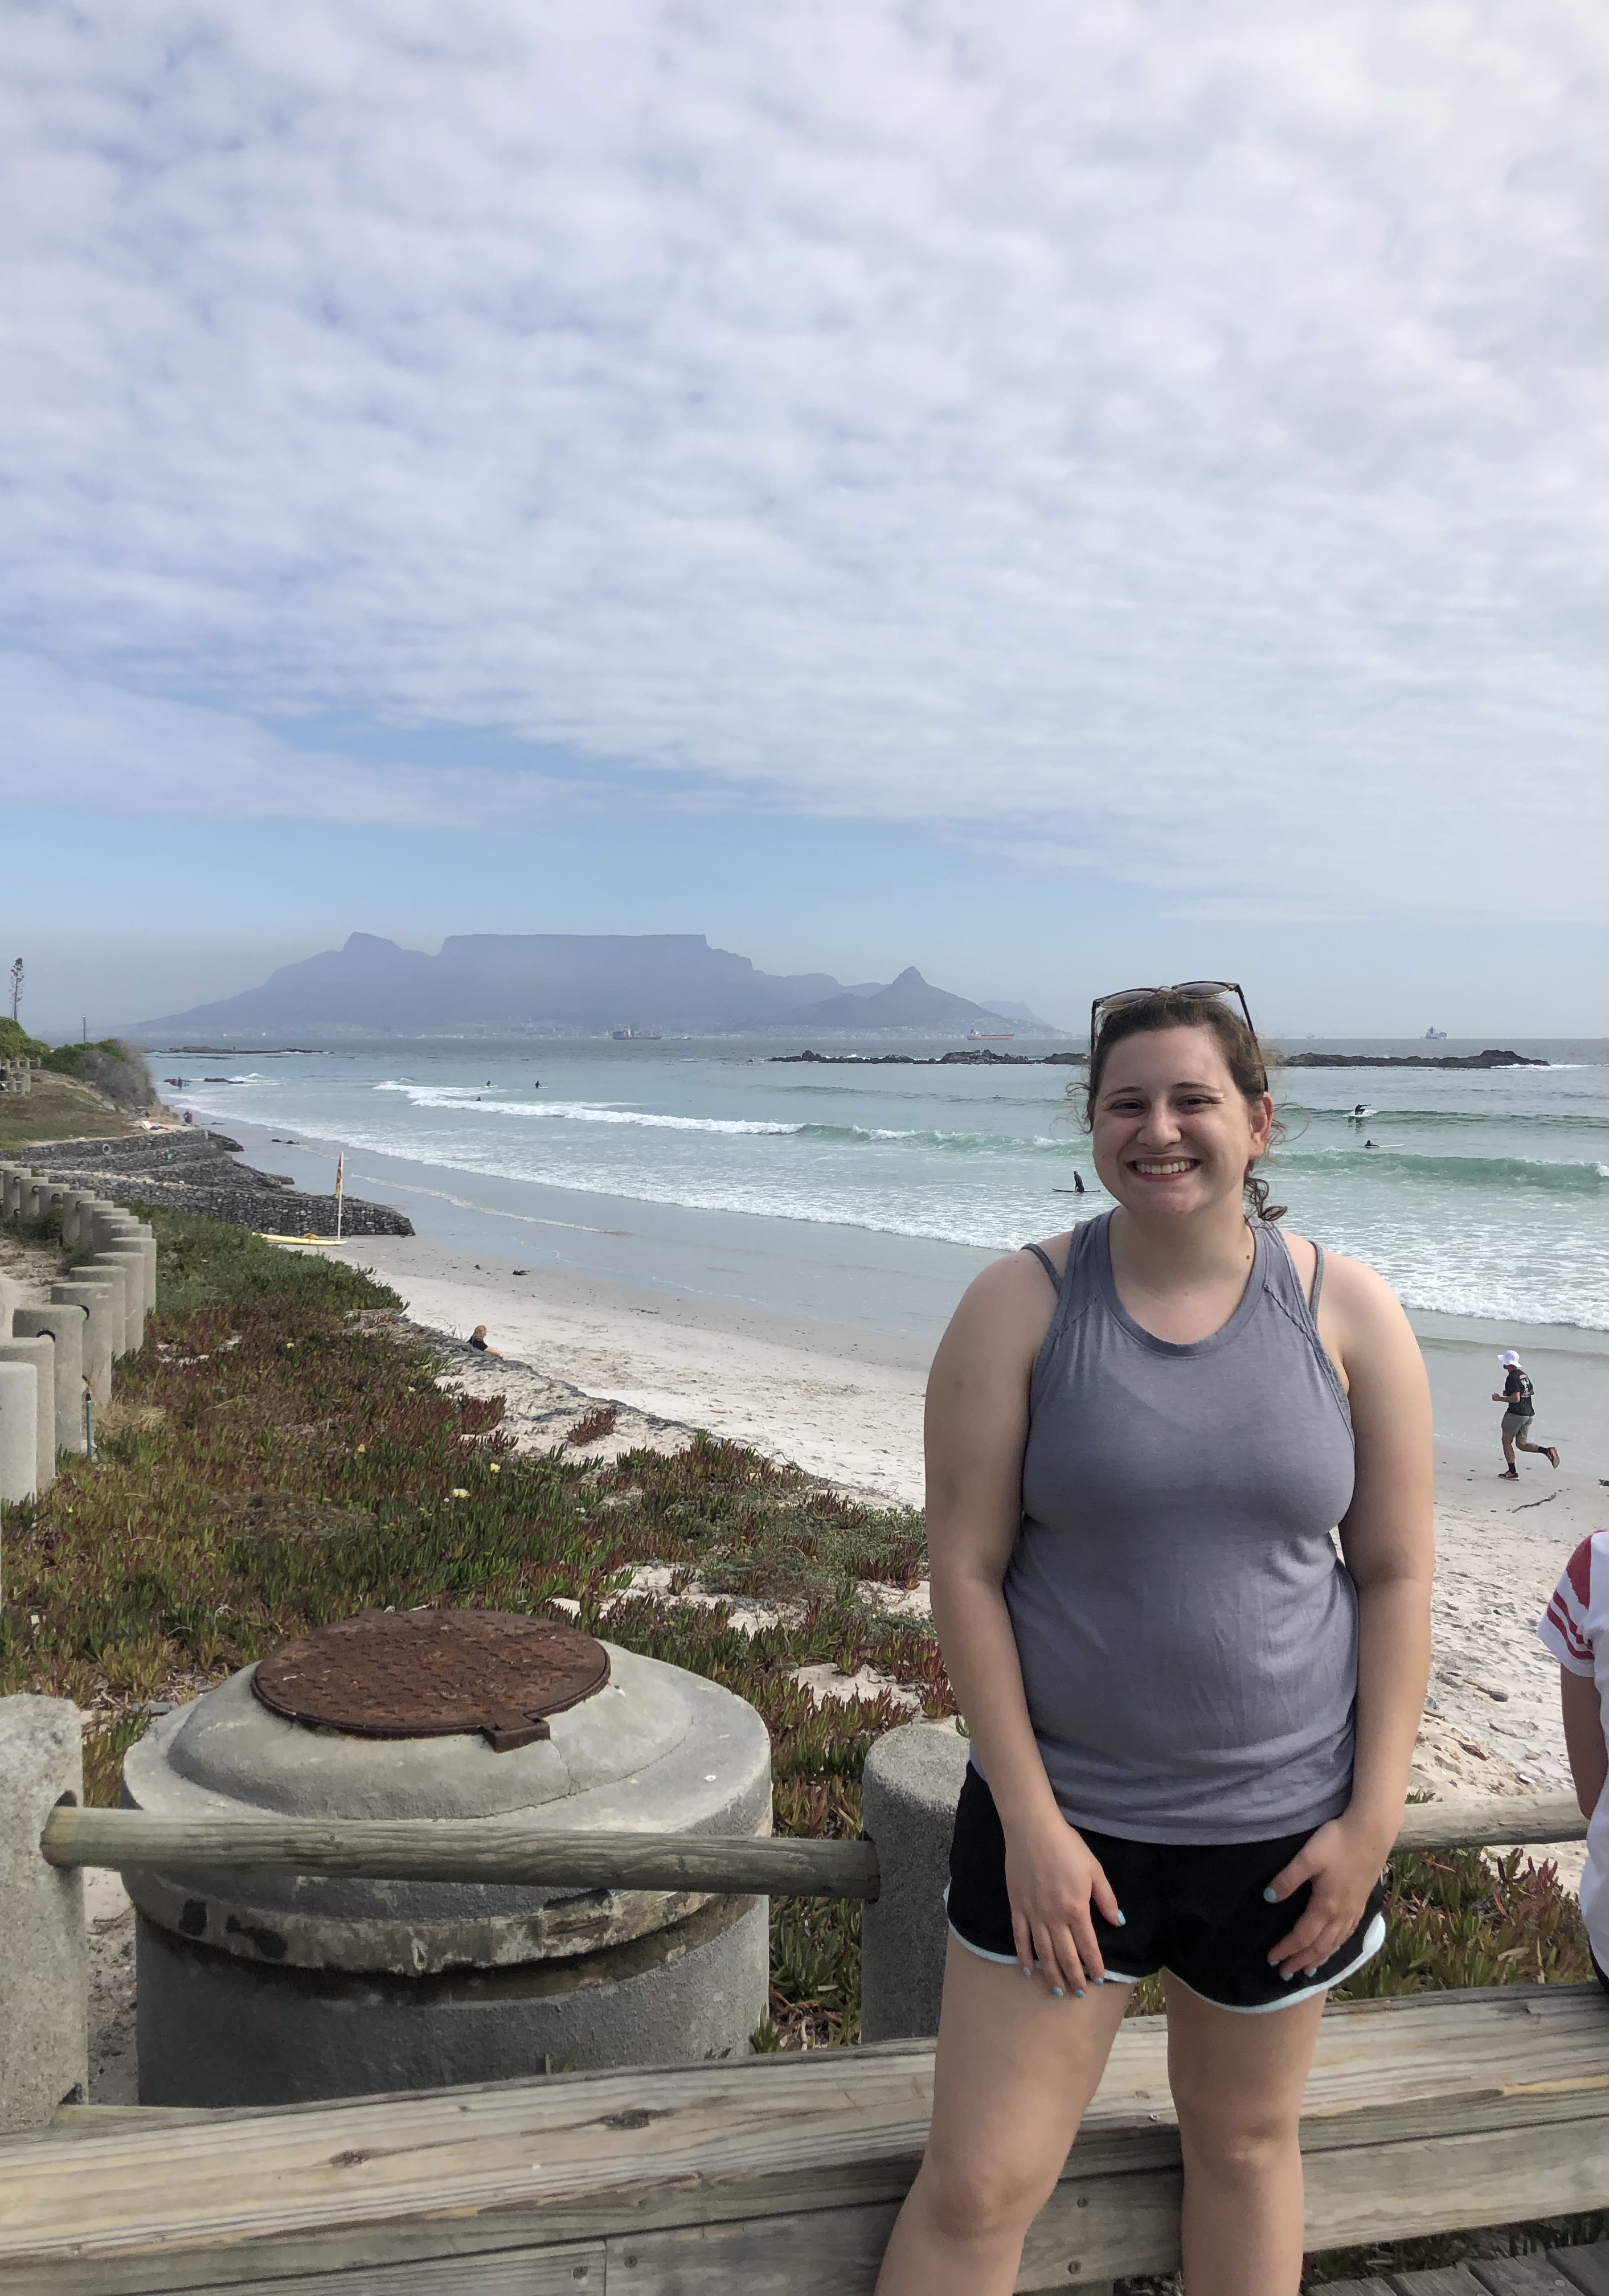 I am standing in front of Table Mountain which can be seen in the distane.